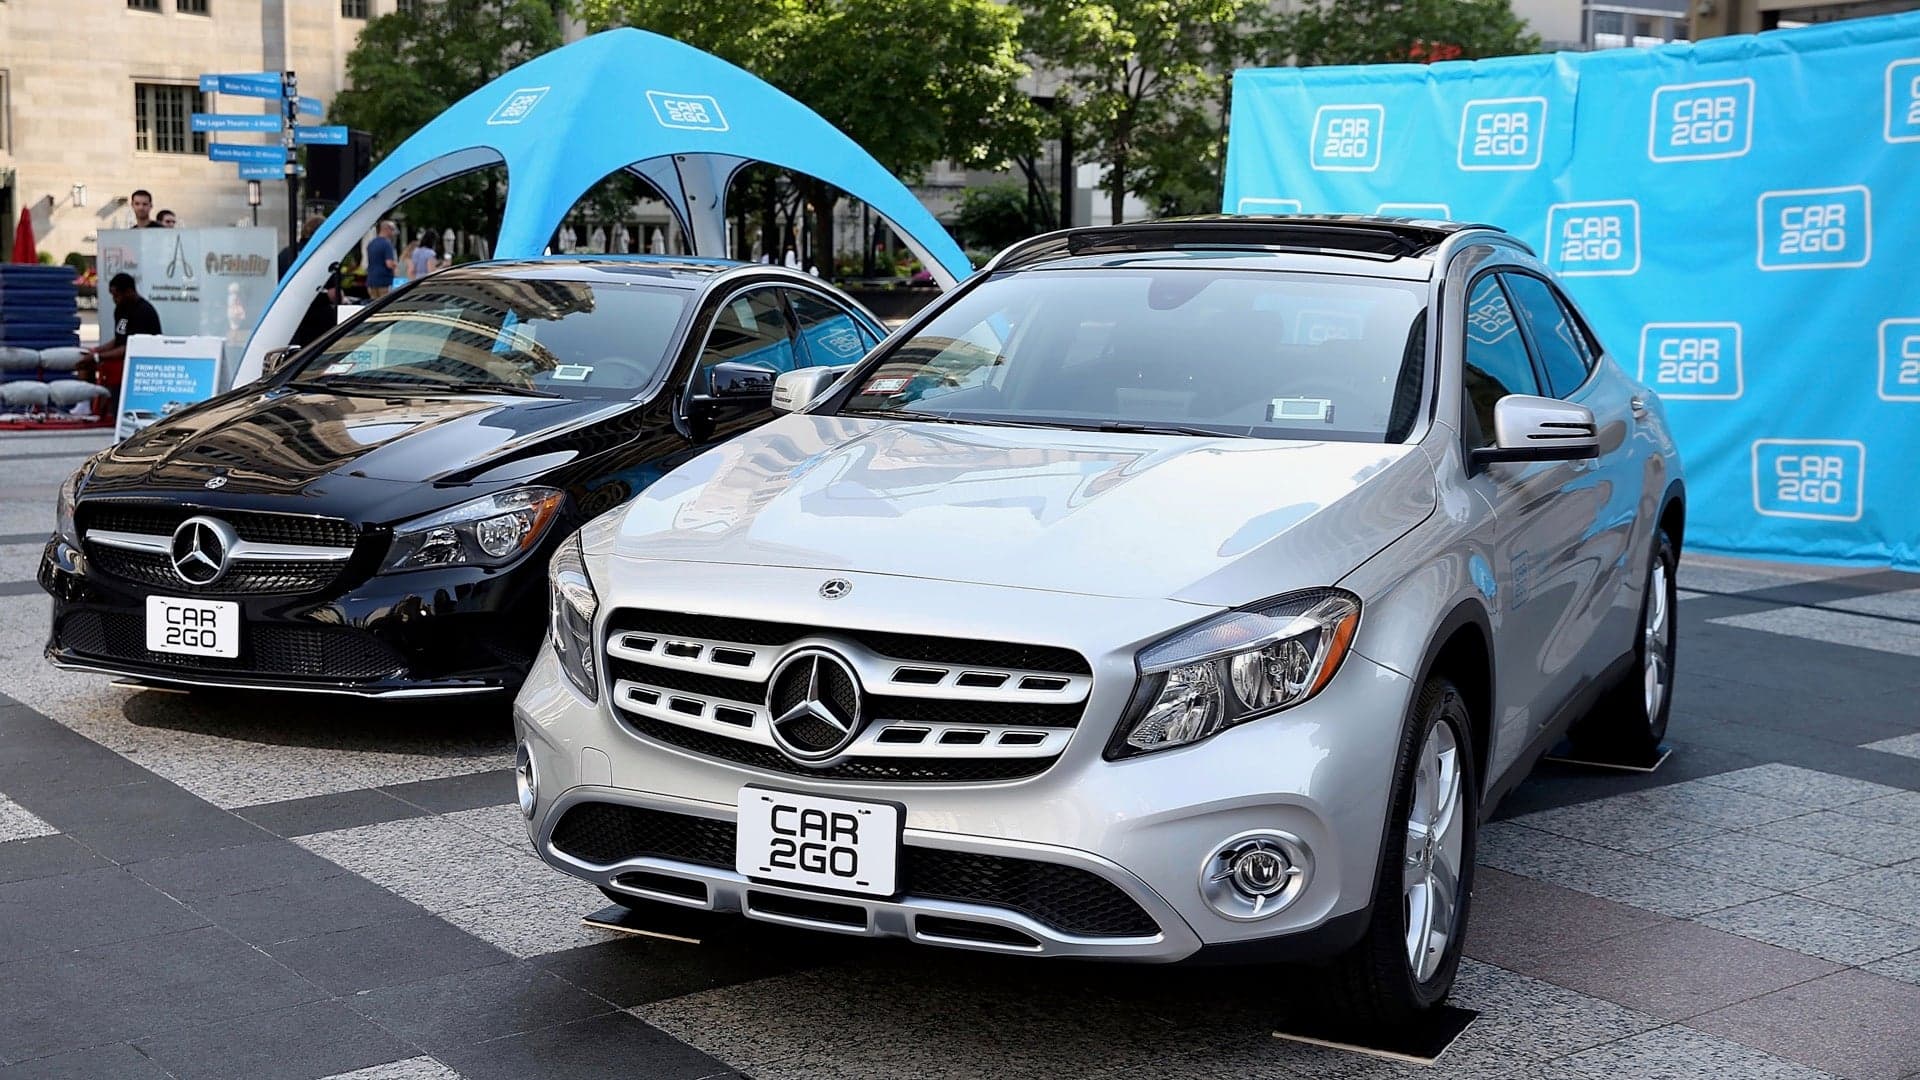 Hackers Steal More Than 100 Mercedes-Benz Cars in Chicago by Hacking Car2Go Car-Sharing App: Report